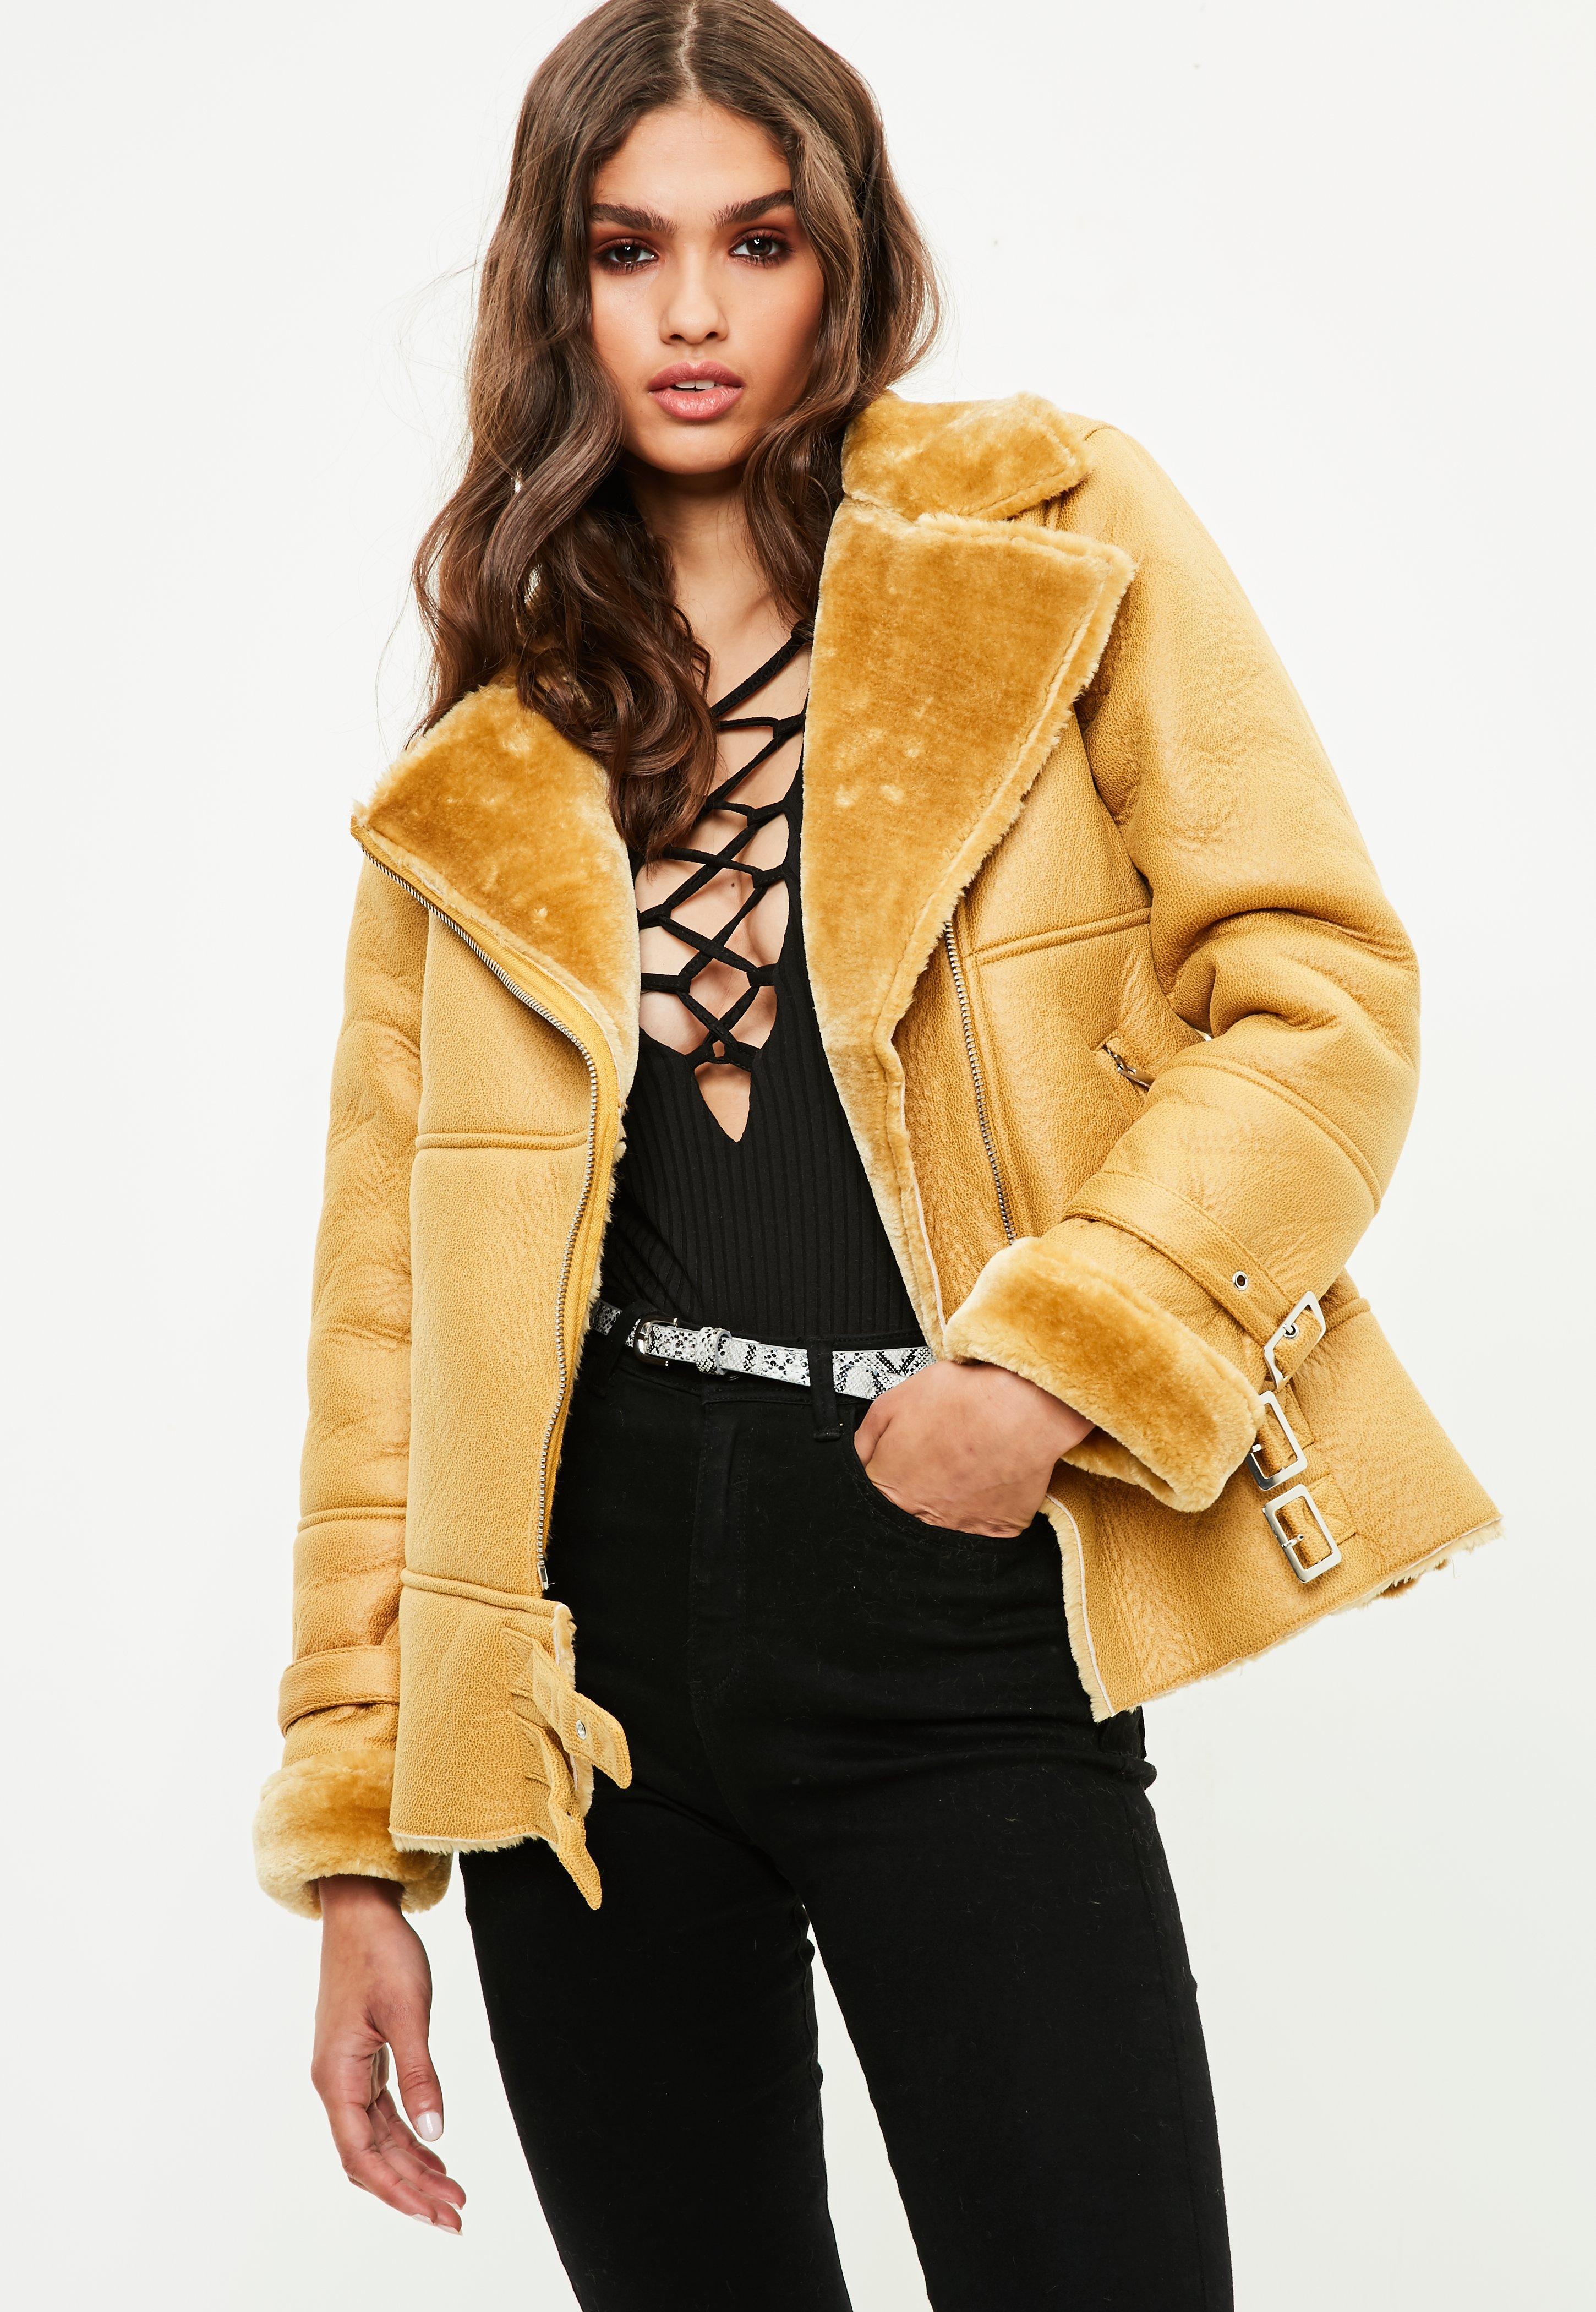 Lyst - Missguided Yellow Ultimate Aviator Jacket in Yellow